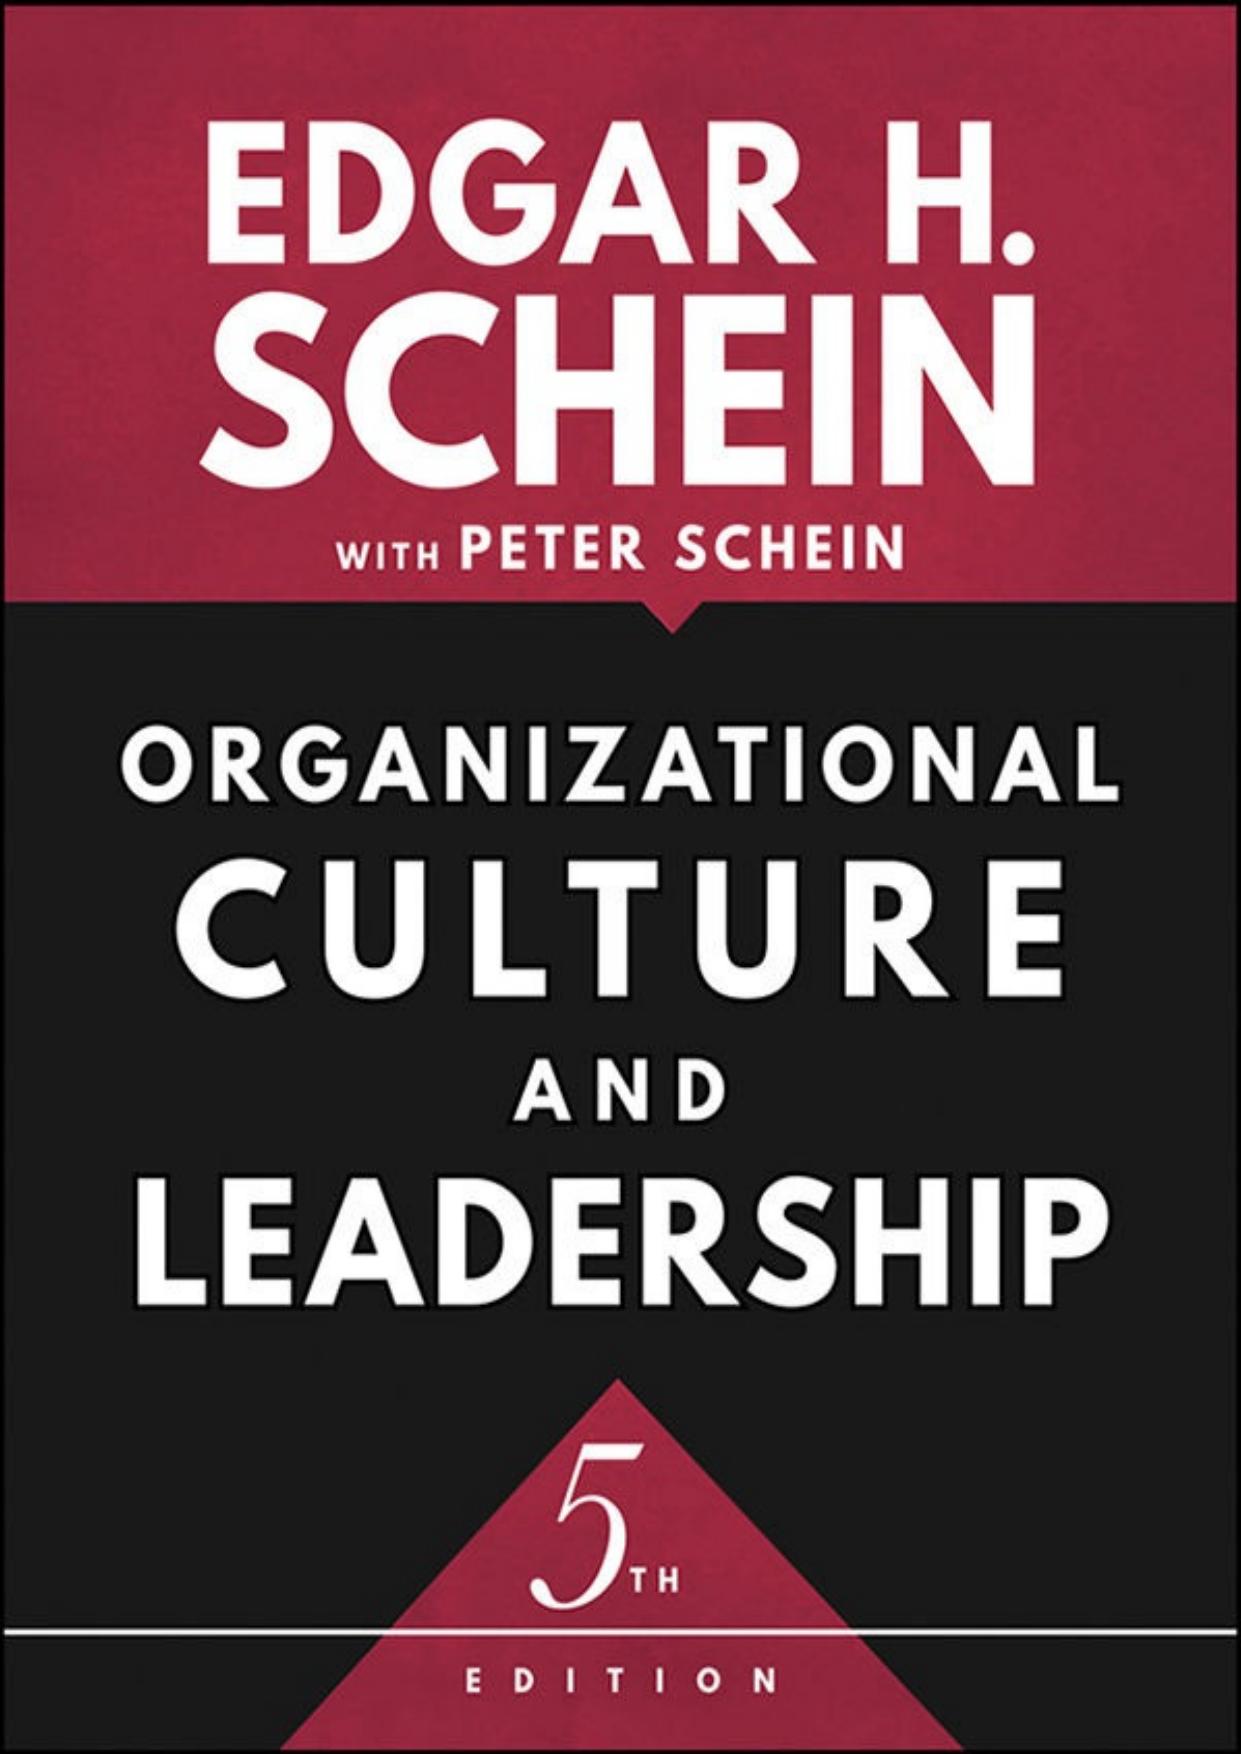 Organizational Culture and Leadership - 5th Edition